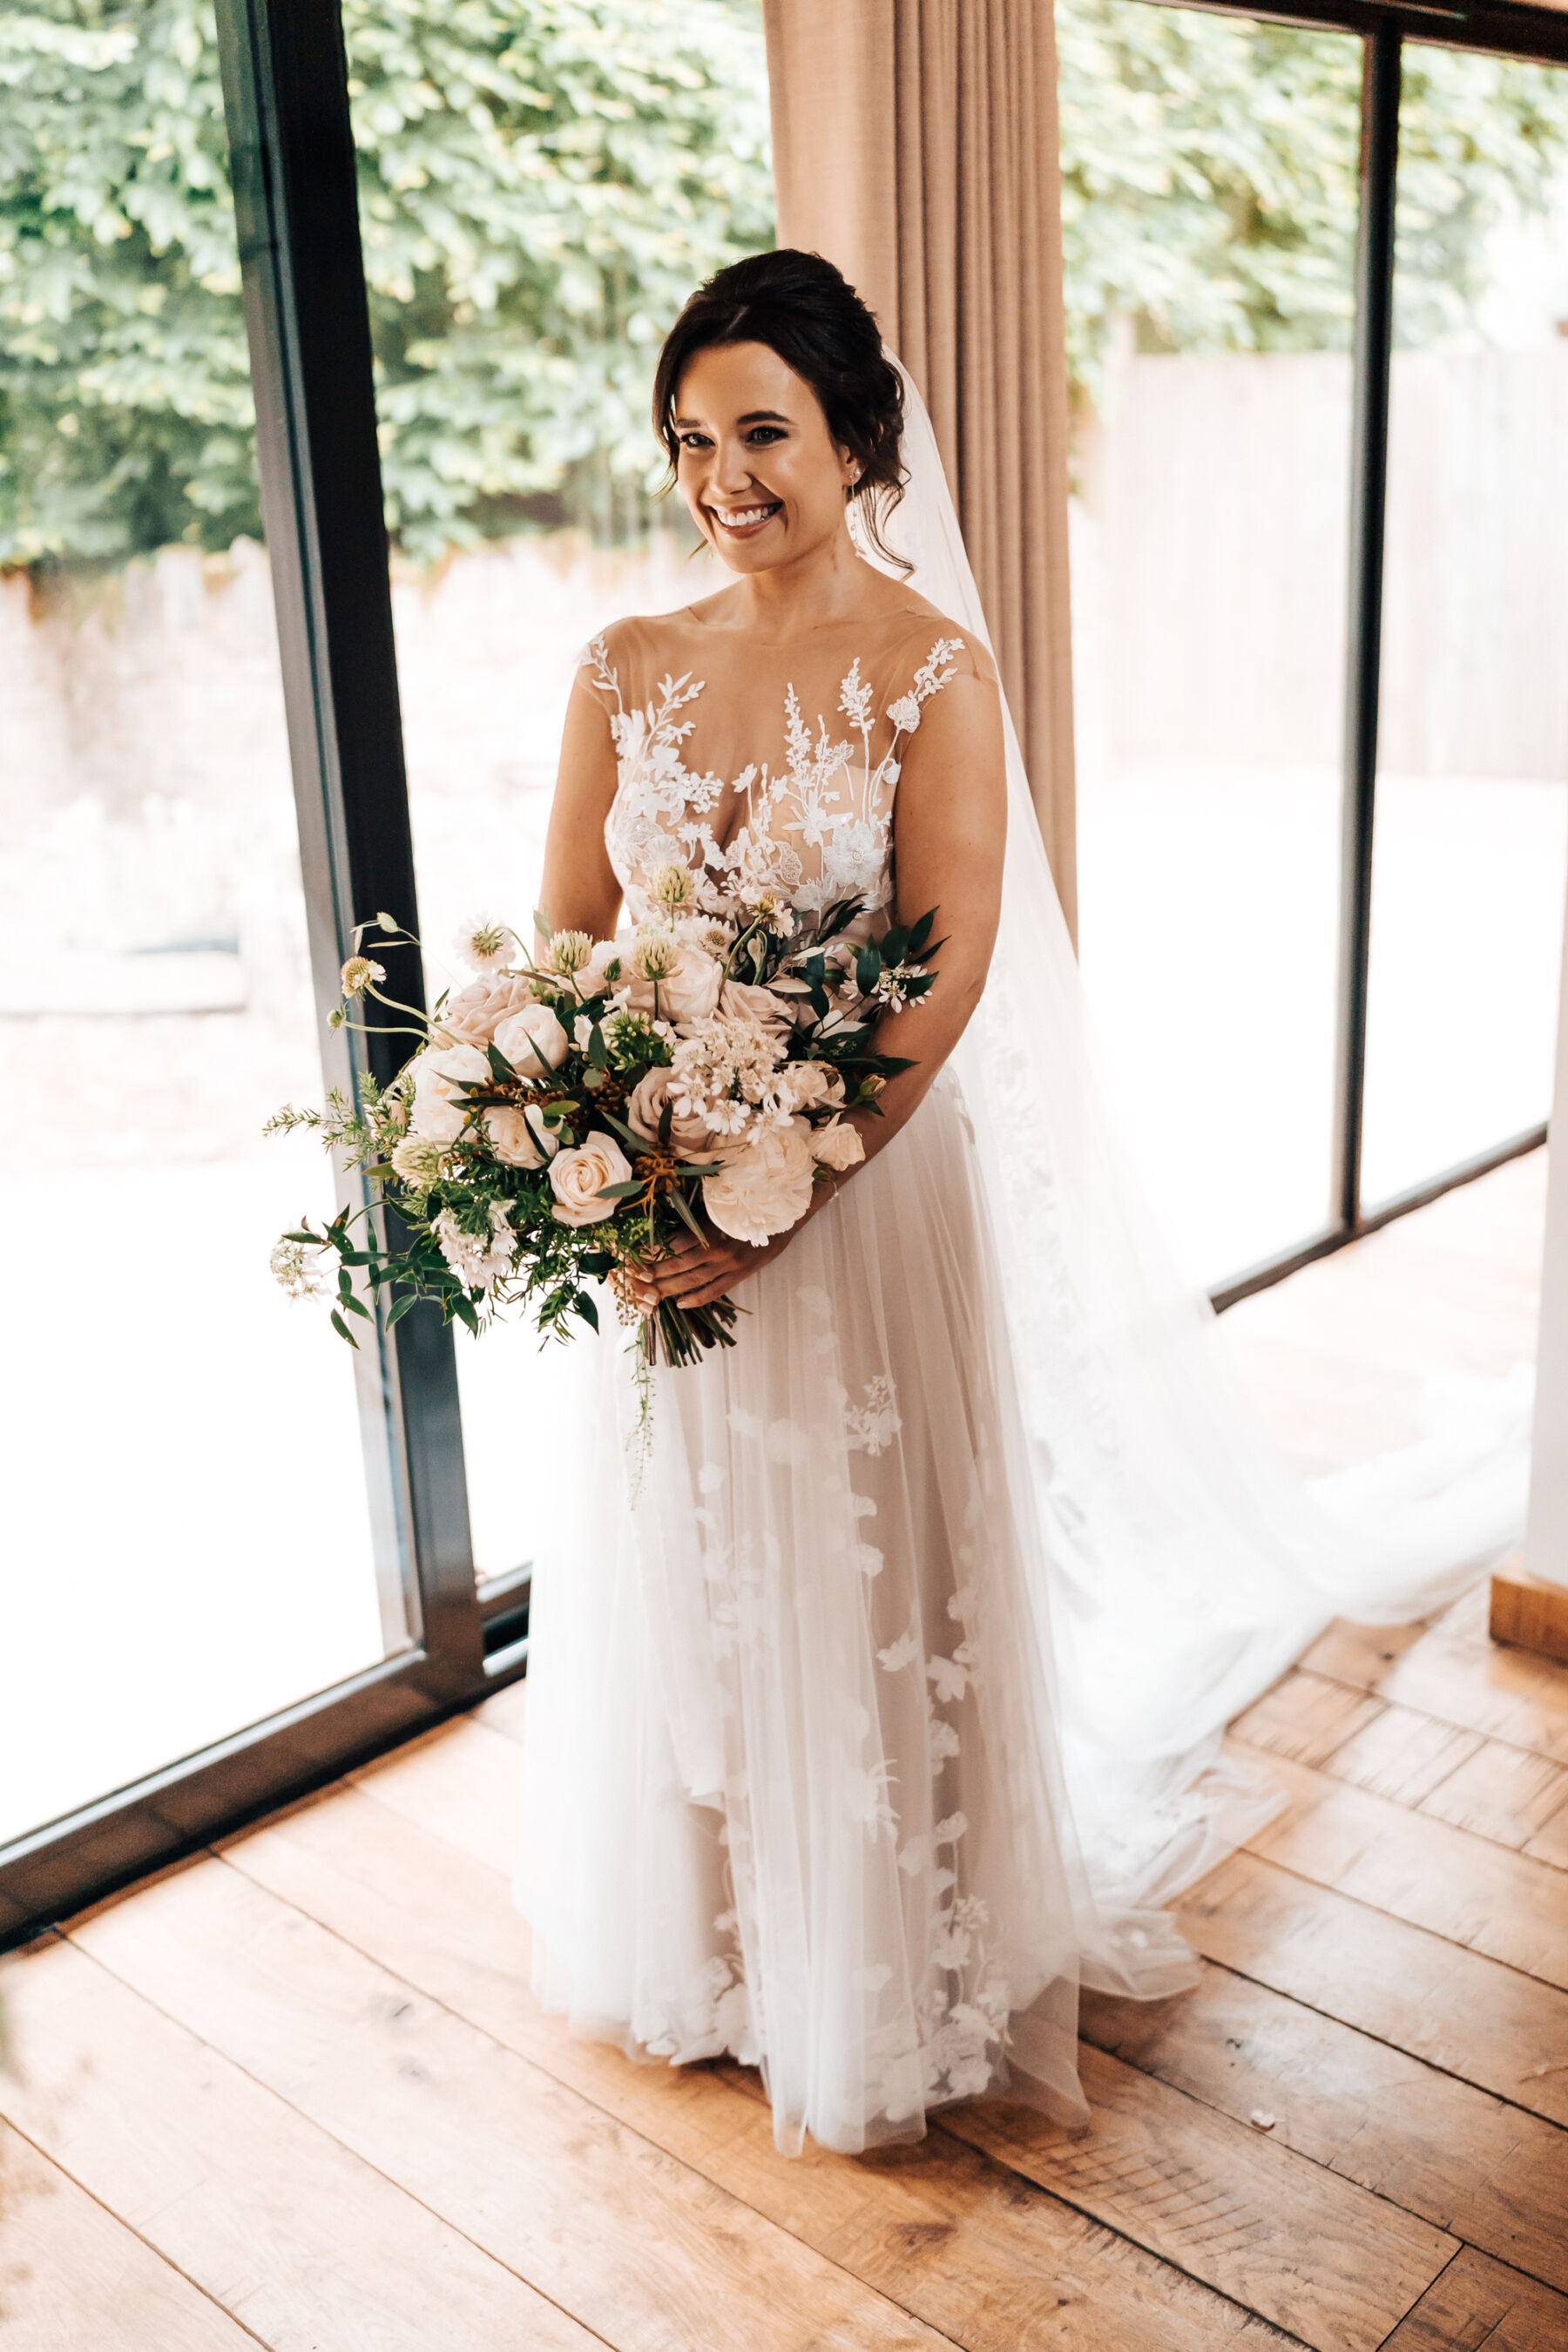 Bride in an Anna Kara dress at Tythe Barn wedding venue in the Cotswolds.